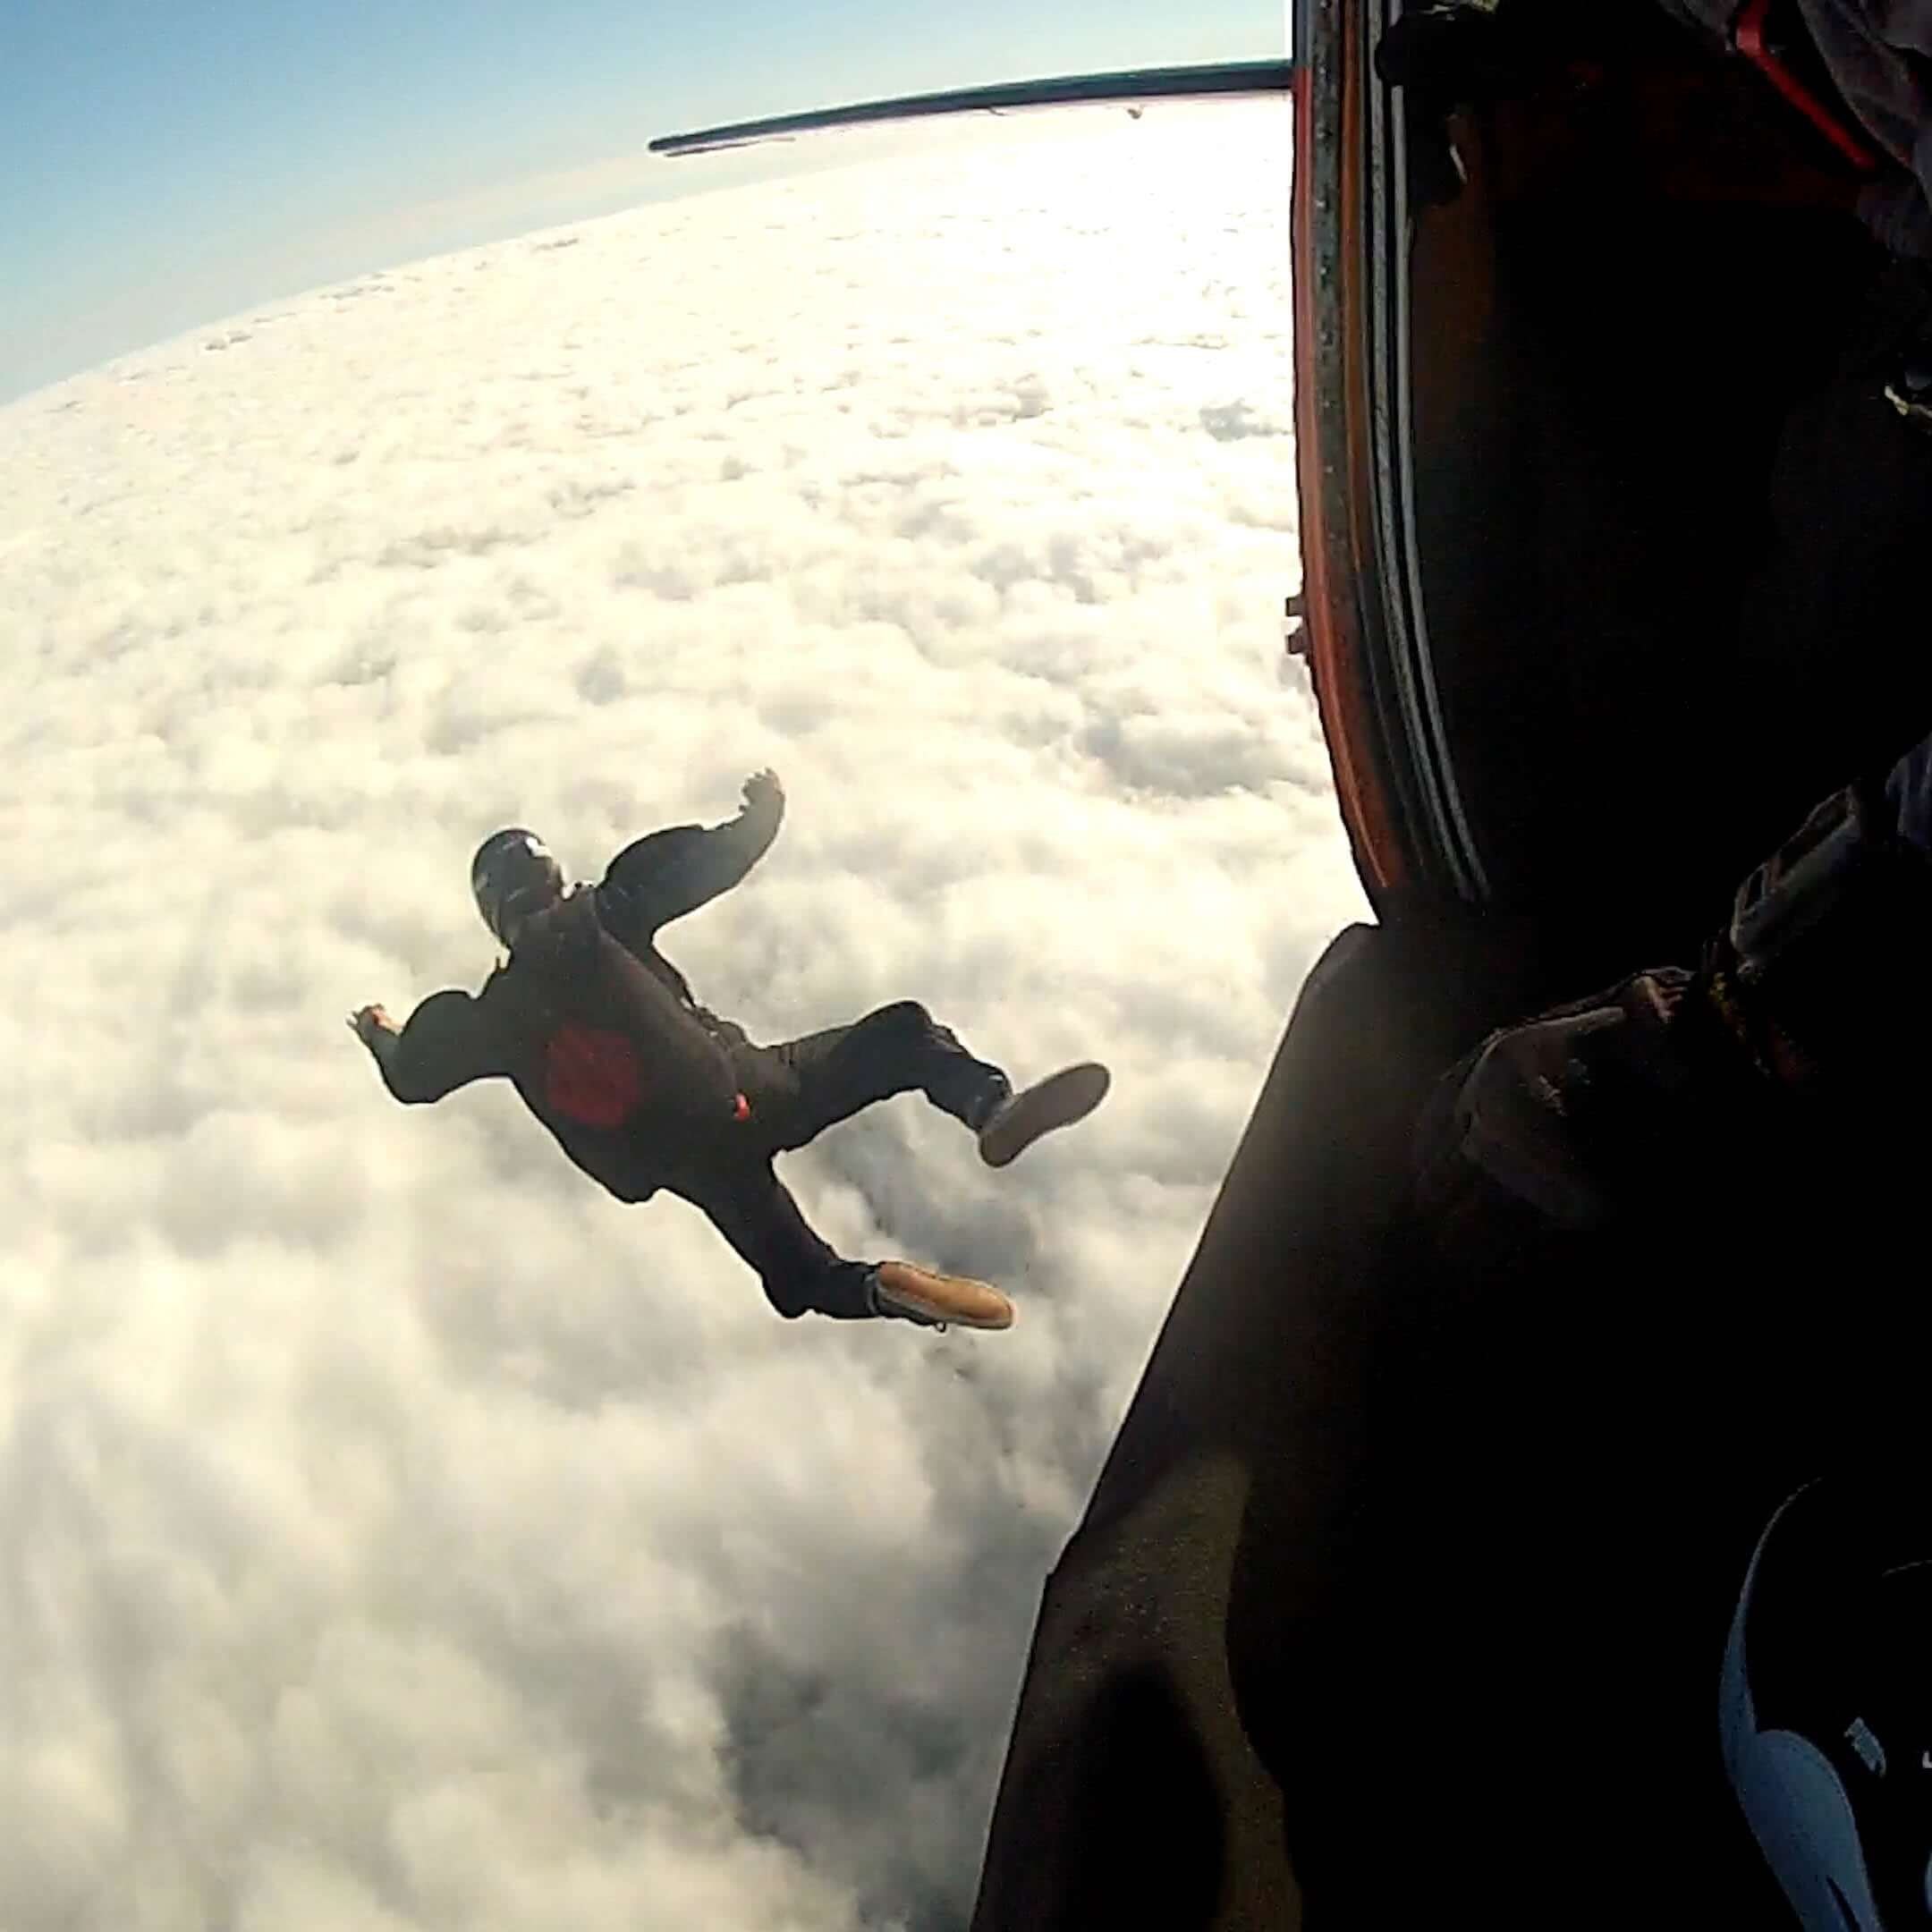  Chris jumping out of a plane above the clouds wearing a parachute 